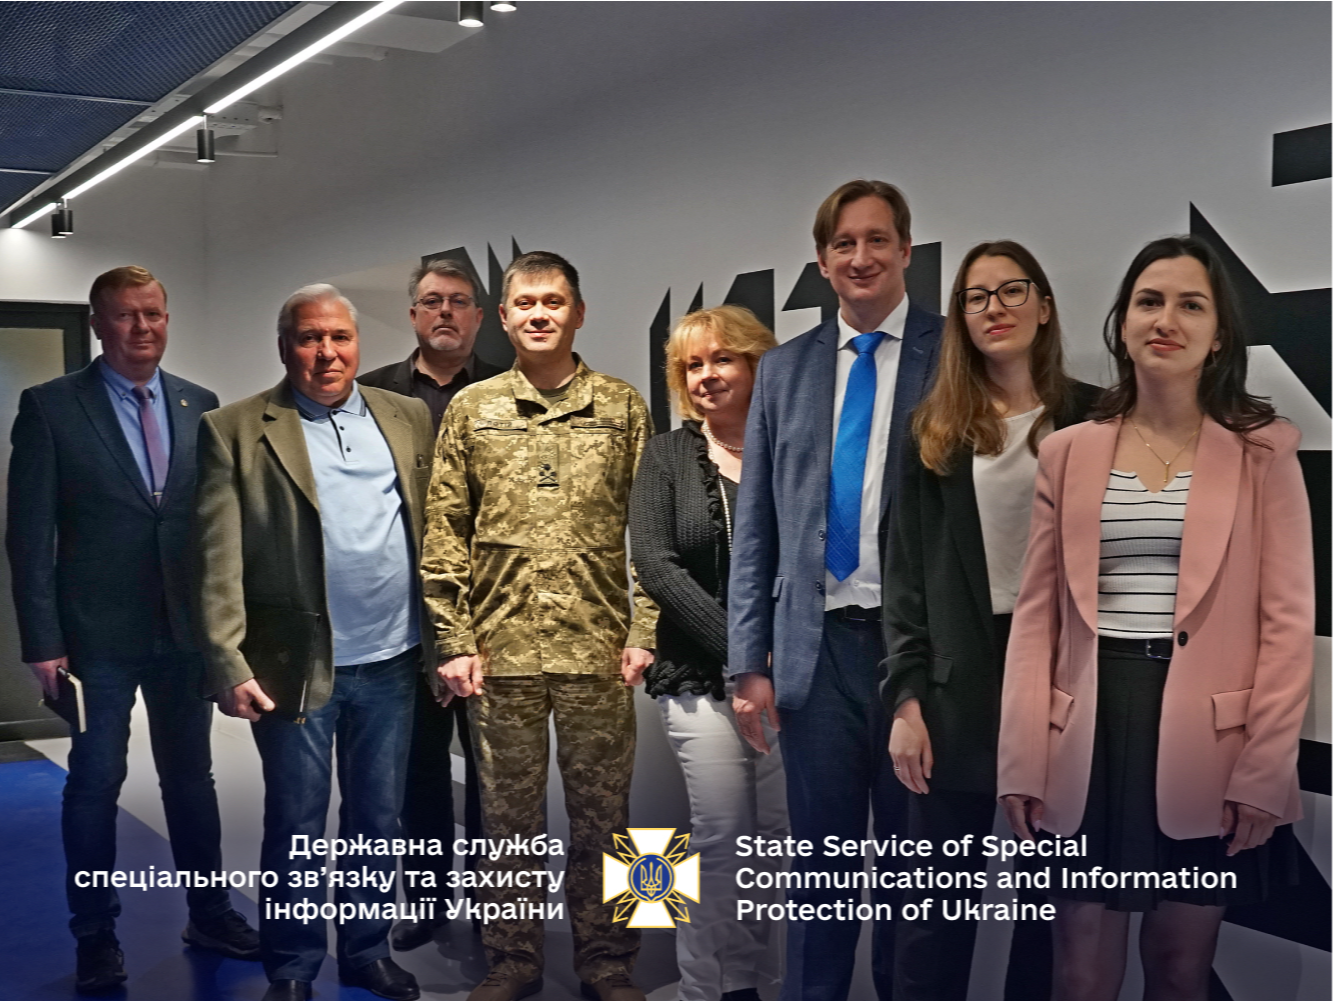 Ukraine is improving the quality of training of professional personnel in the field of cyber security and information protection - Qualification Center